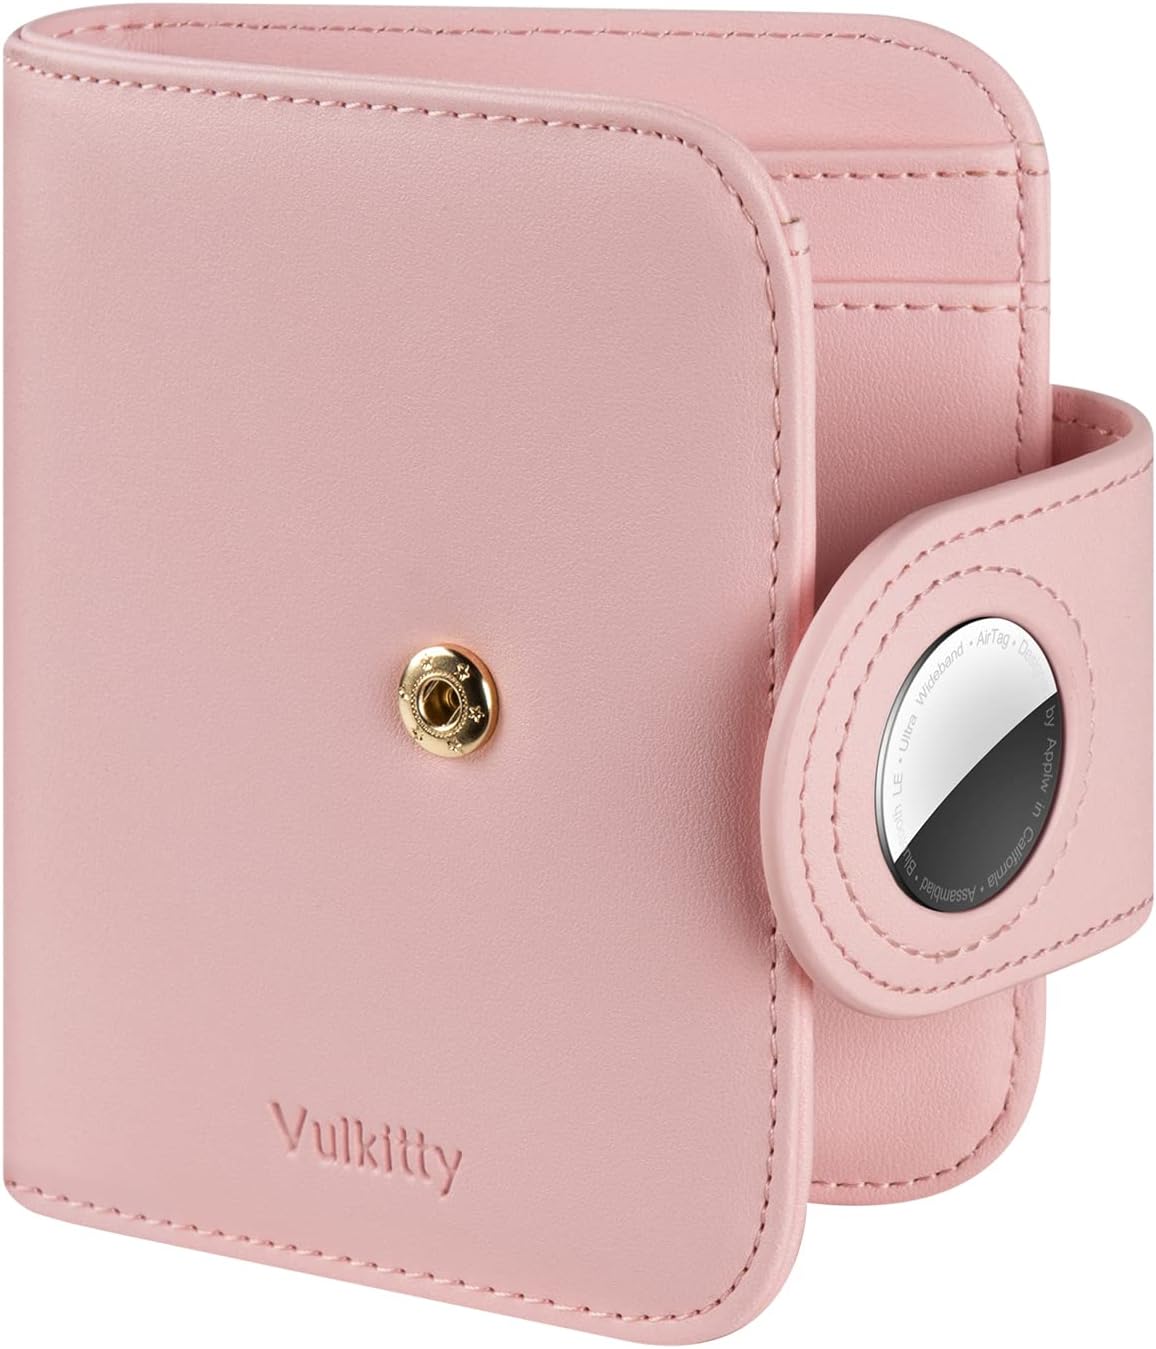 Portefeuille Compact pour Femme Vulkitty